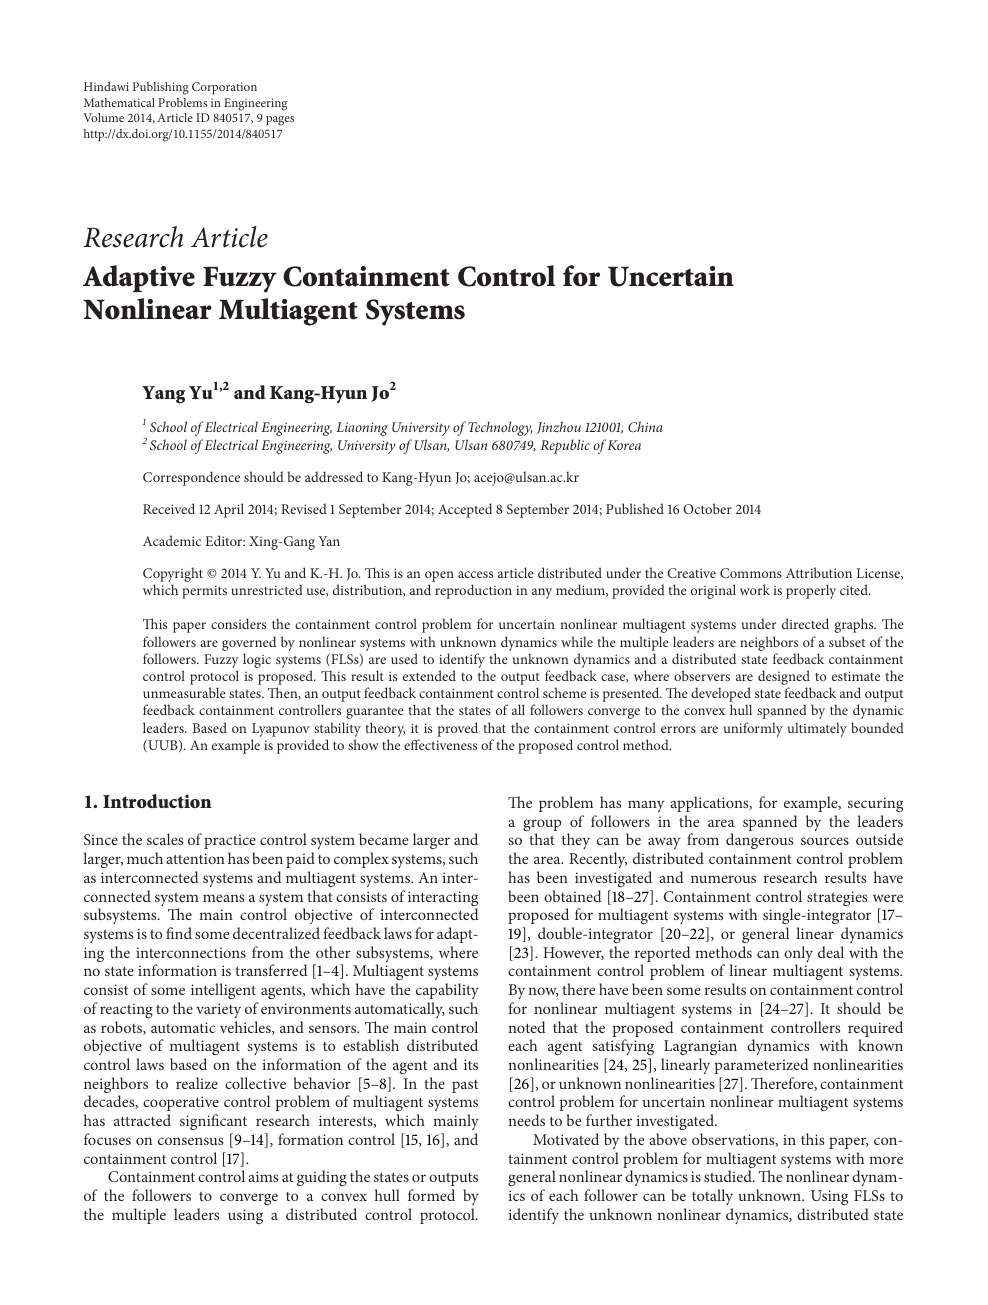 Adaptive Fuzzy Containment Control For Uncertain Nonlinear Multiagent Systems Topic Of Research Paper In Mathematics Download Scholarly Article Pdf And Read For Free On Cyberleninka Open Science Hub